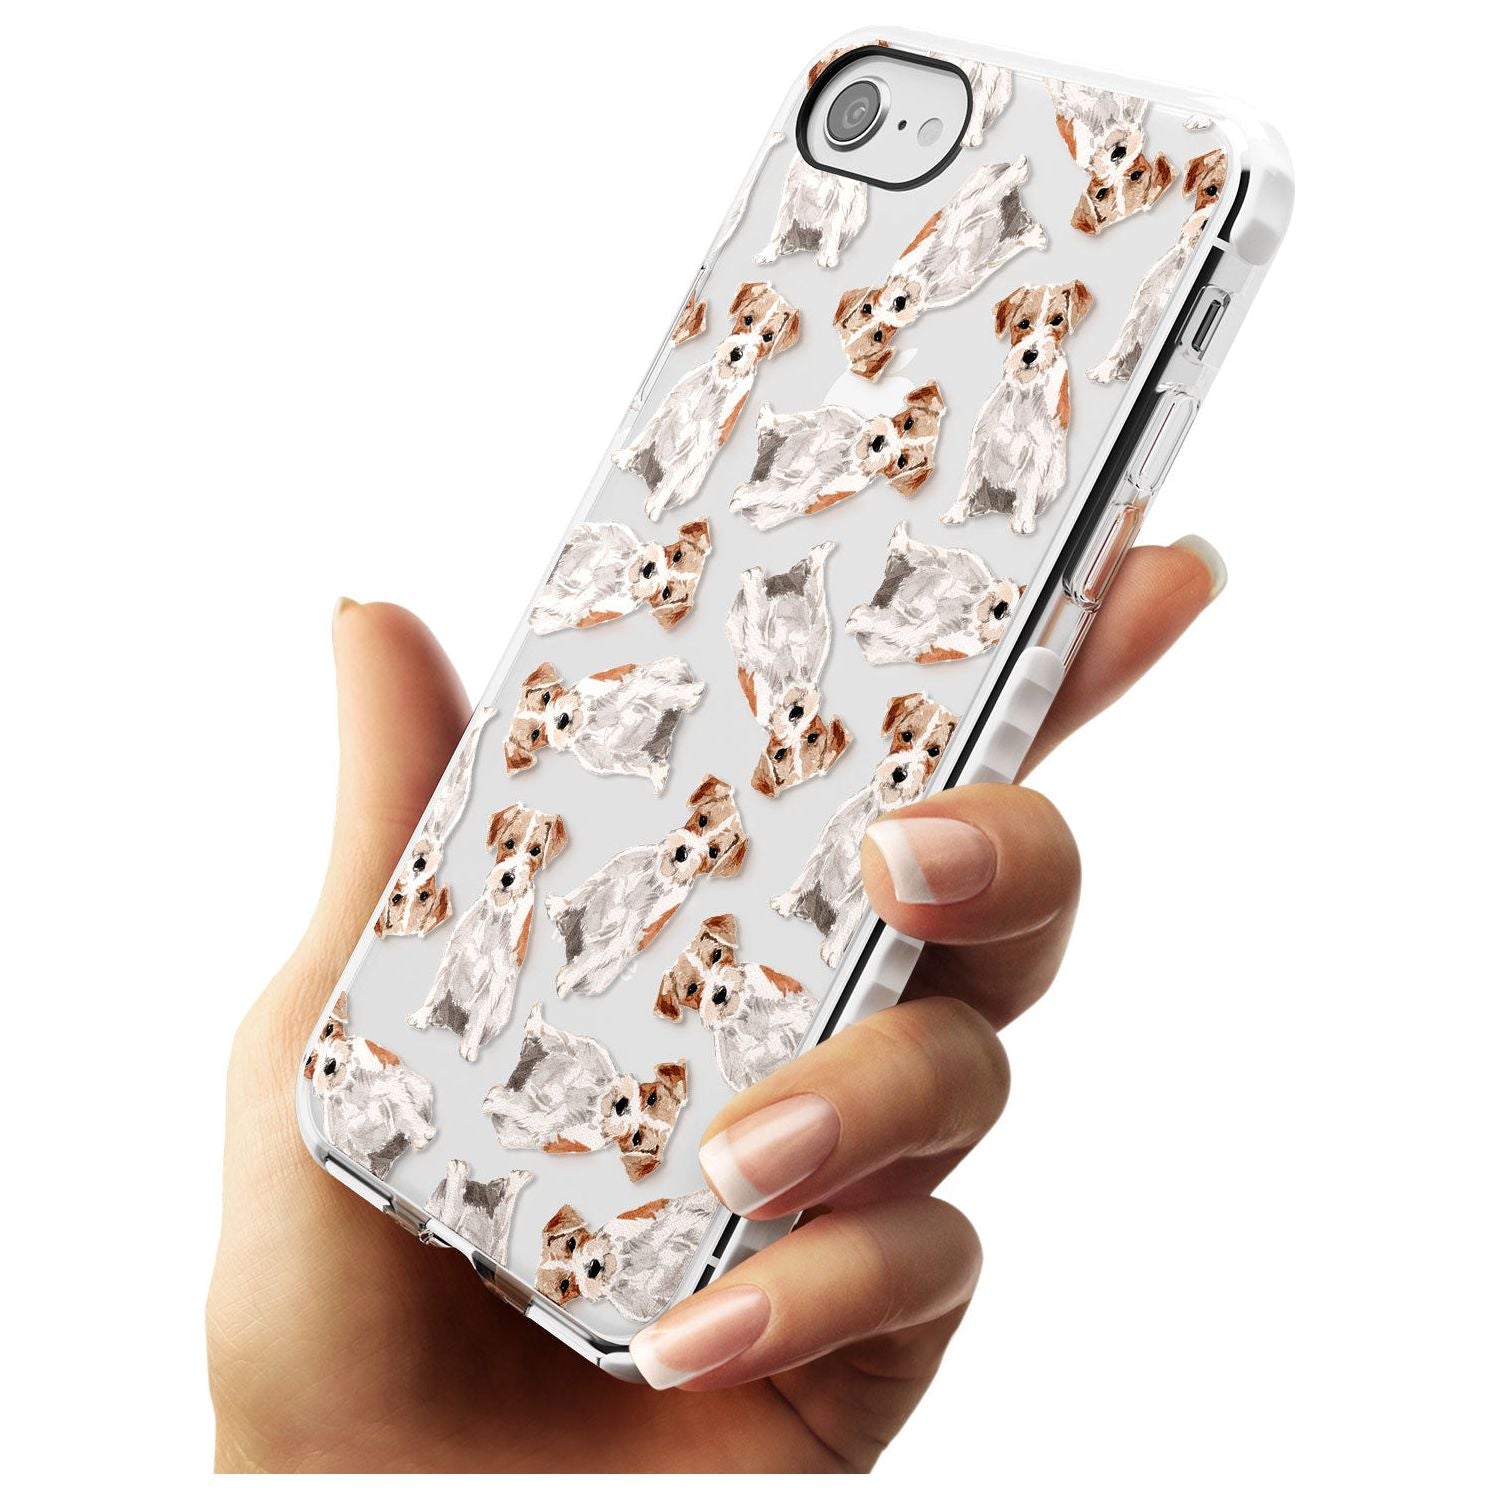 Wirehaired Jack Russell Watercolour Dog Pattern Impact Phone Case for iPhone SE 8 7 Plus